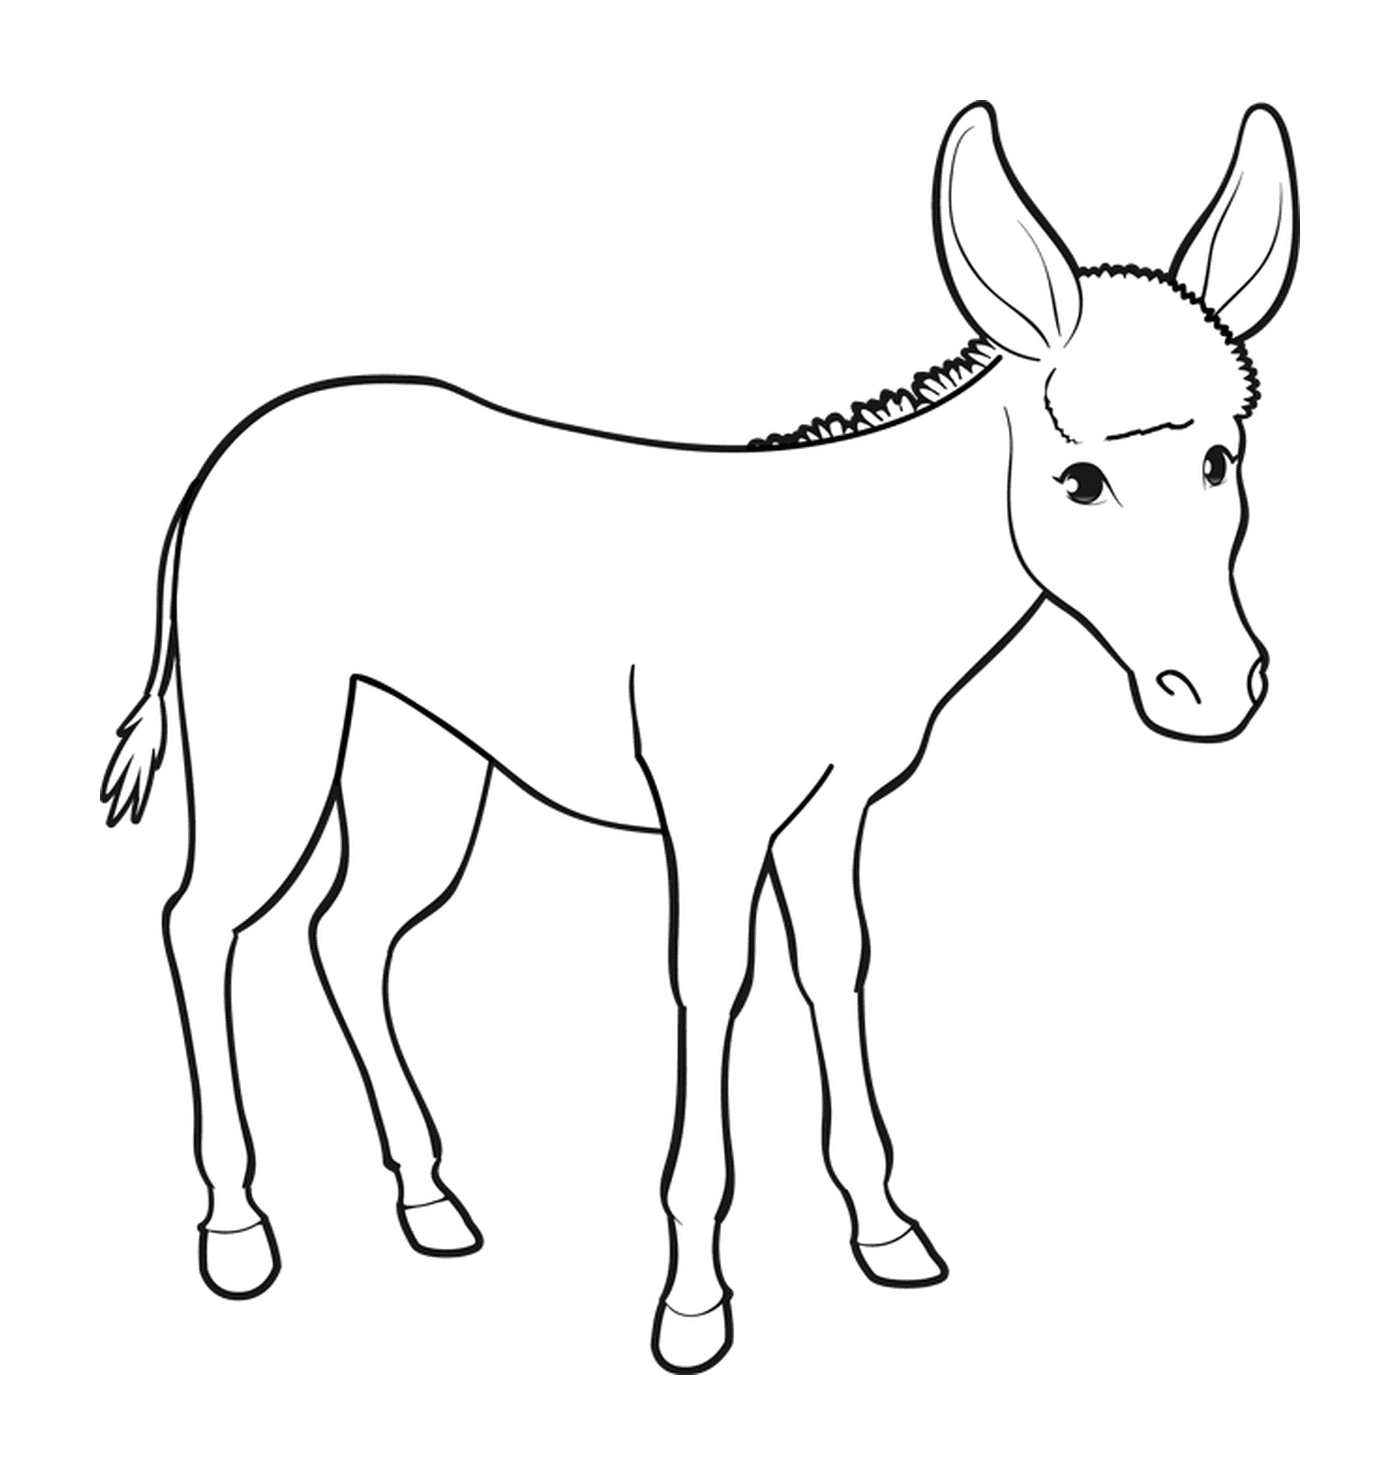  A donkey with long ears 